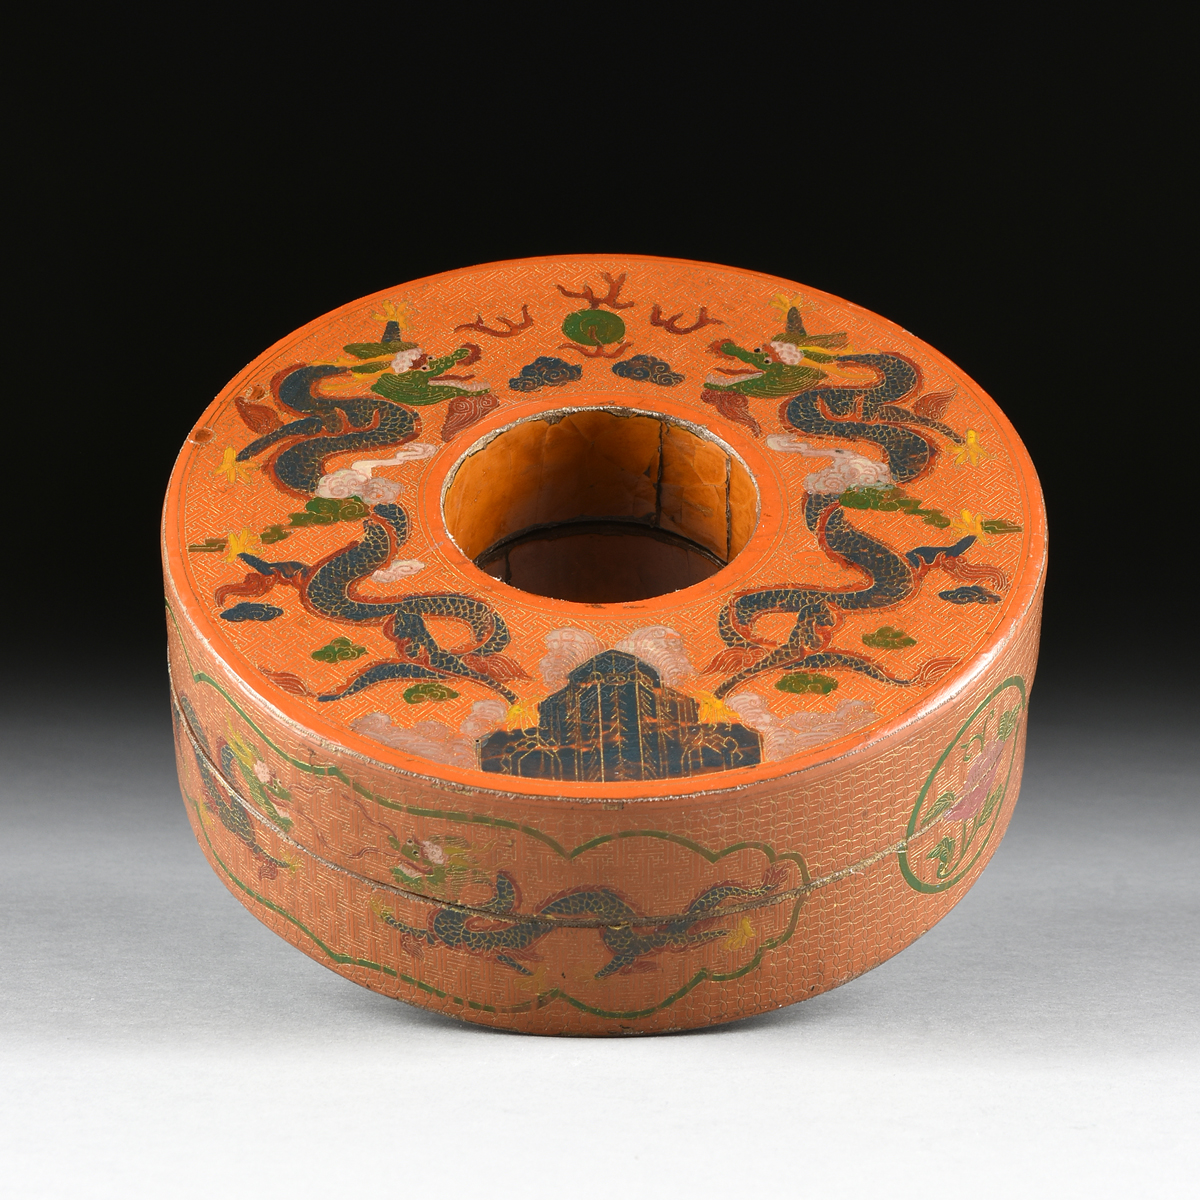 A CHINESE COIN FORM COVERED LACQUERED WOOD BOX, EARLY 20TH CENTURY, the orange lacquered wood box of